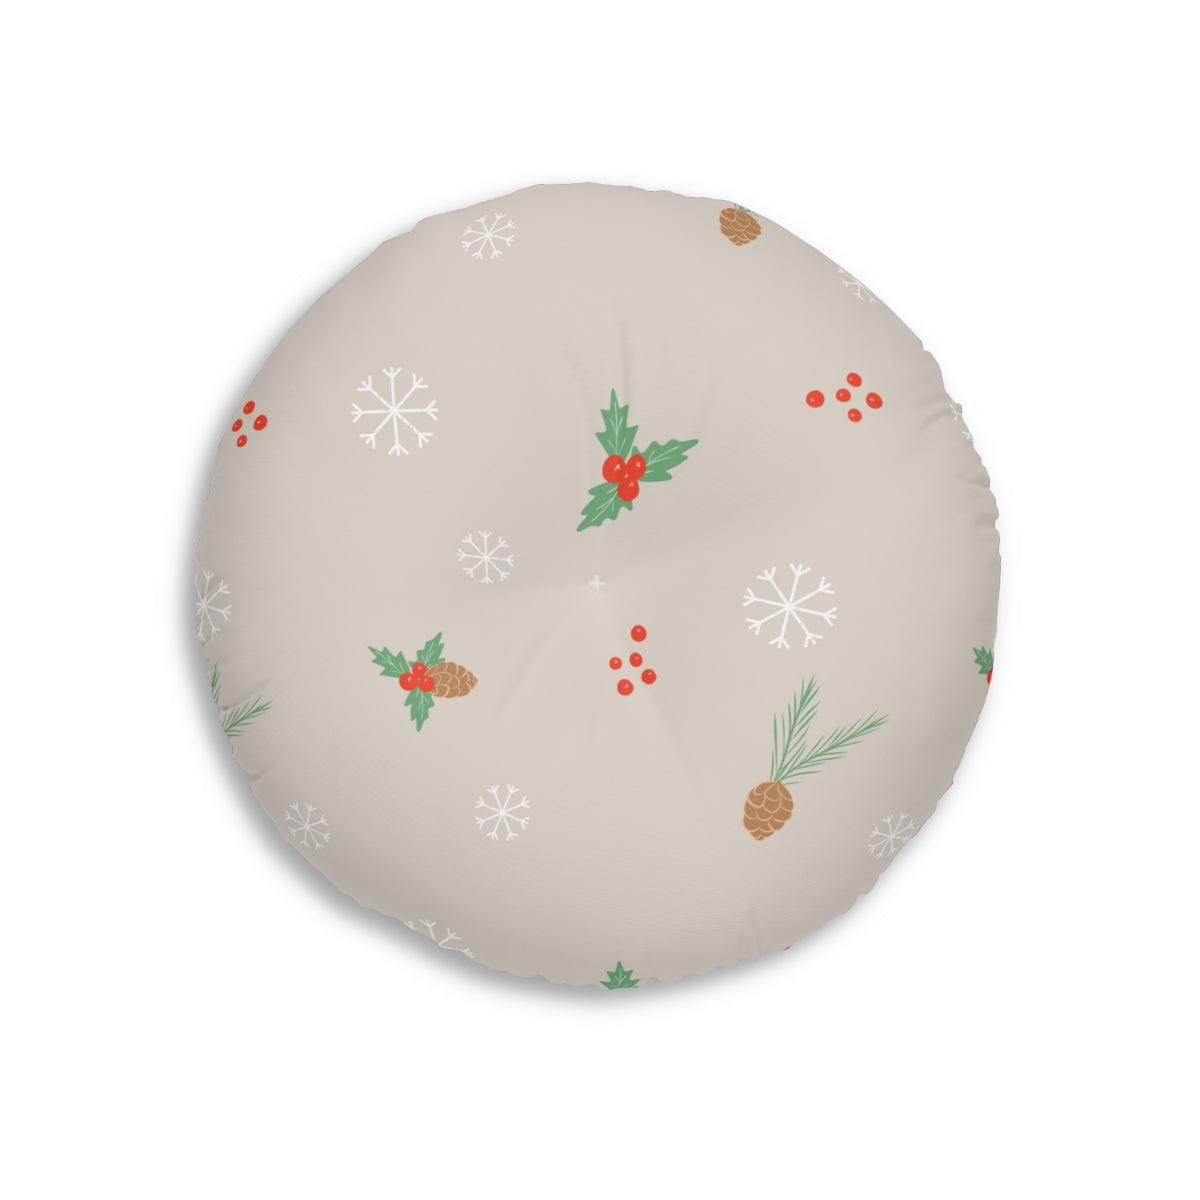 Lifestyle Details - Beige Round Tufted Holiday Floor Pillow - Pinecones & Holly - 26x26 - Front View